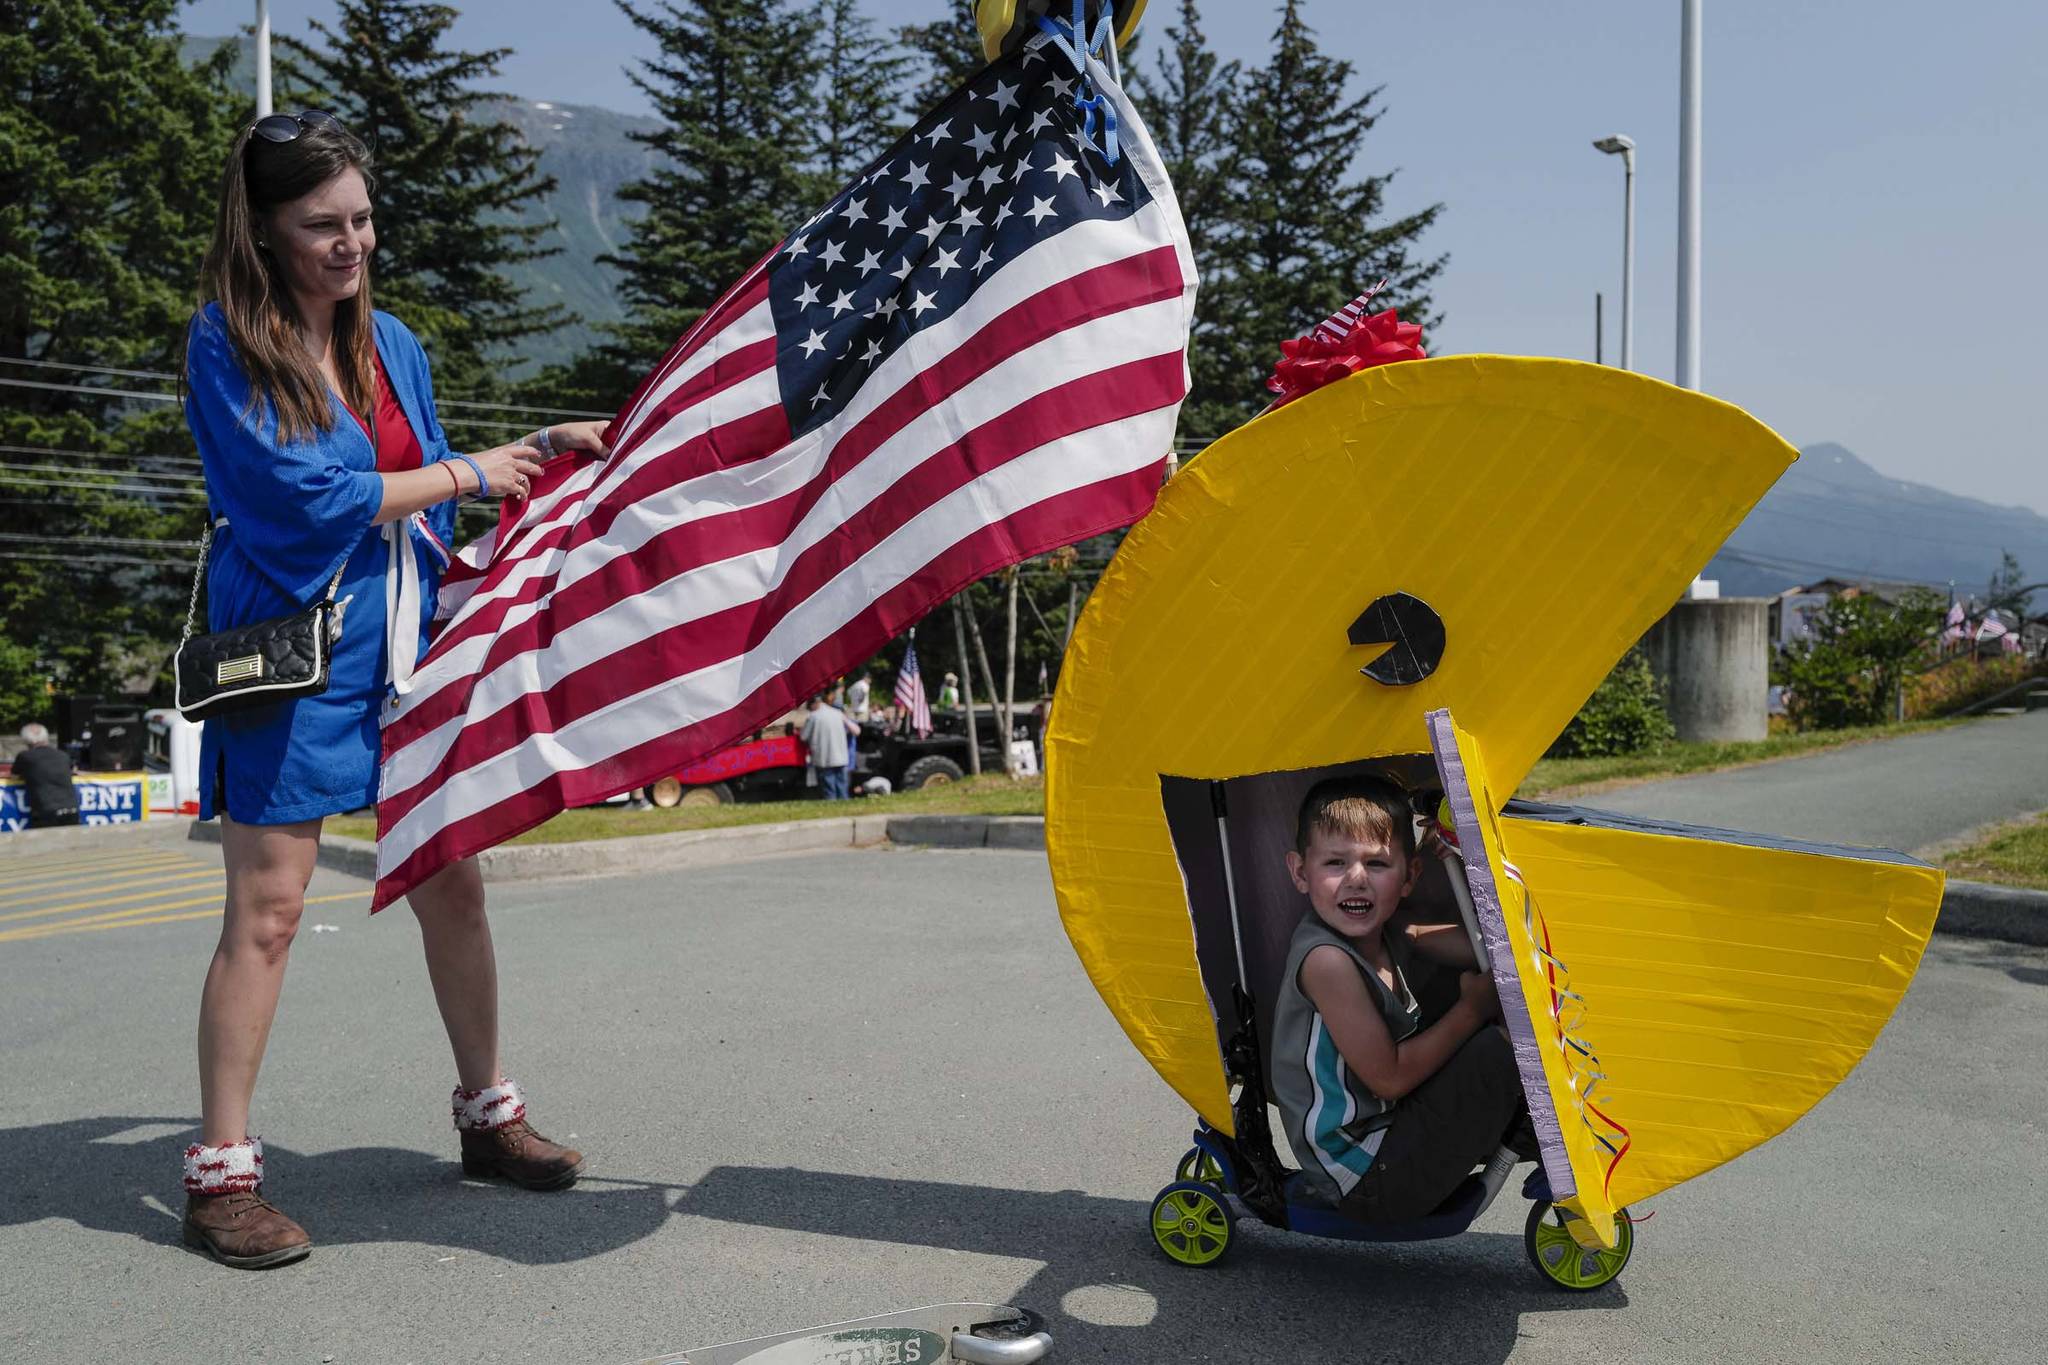 Joseph Kinville, 4, and his mother, Jessica, prepare for the Douglas Fourth of July Parade on Thursday, July 4, 2019. Joseph won $5 for the best boys decorated bicycle in the character division by the Douglas Fourth of July Committee. (Michael Penn | Juneau Empire)